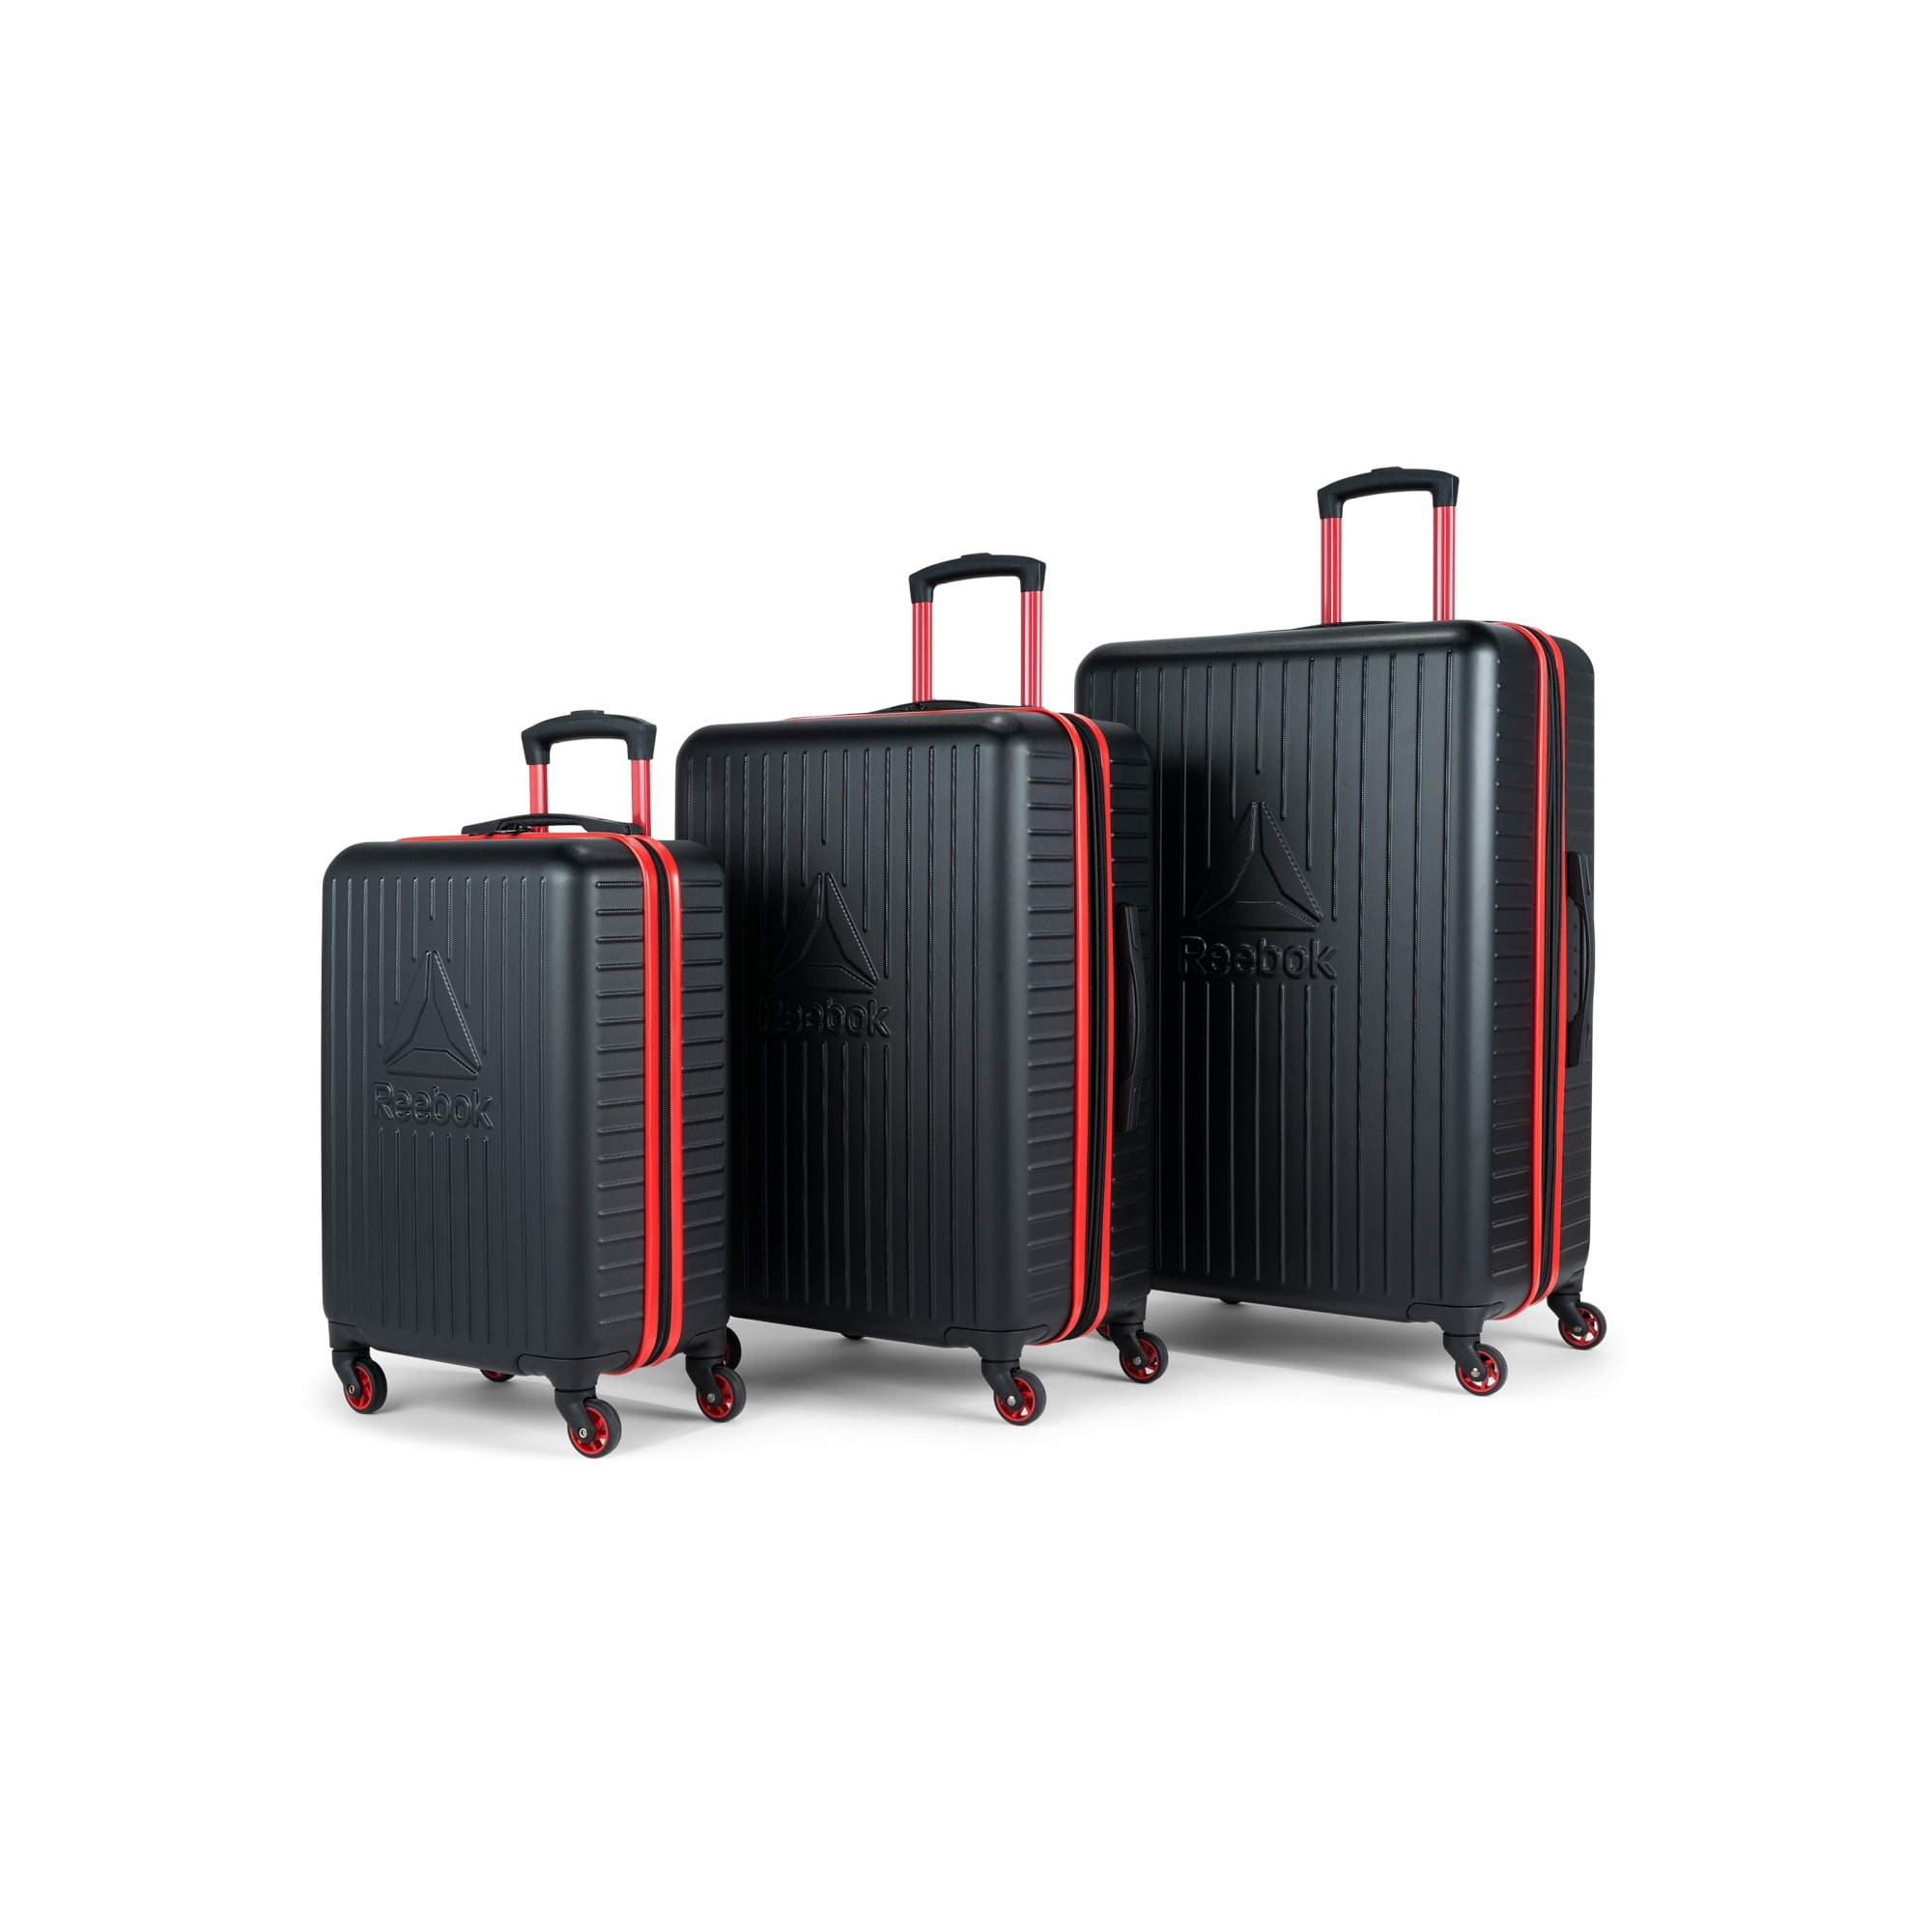 Reebok- Hoop Collection - 3 piece hardside set luggage nested - ABS ...